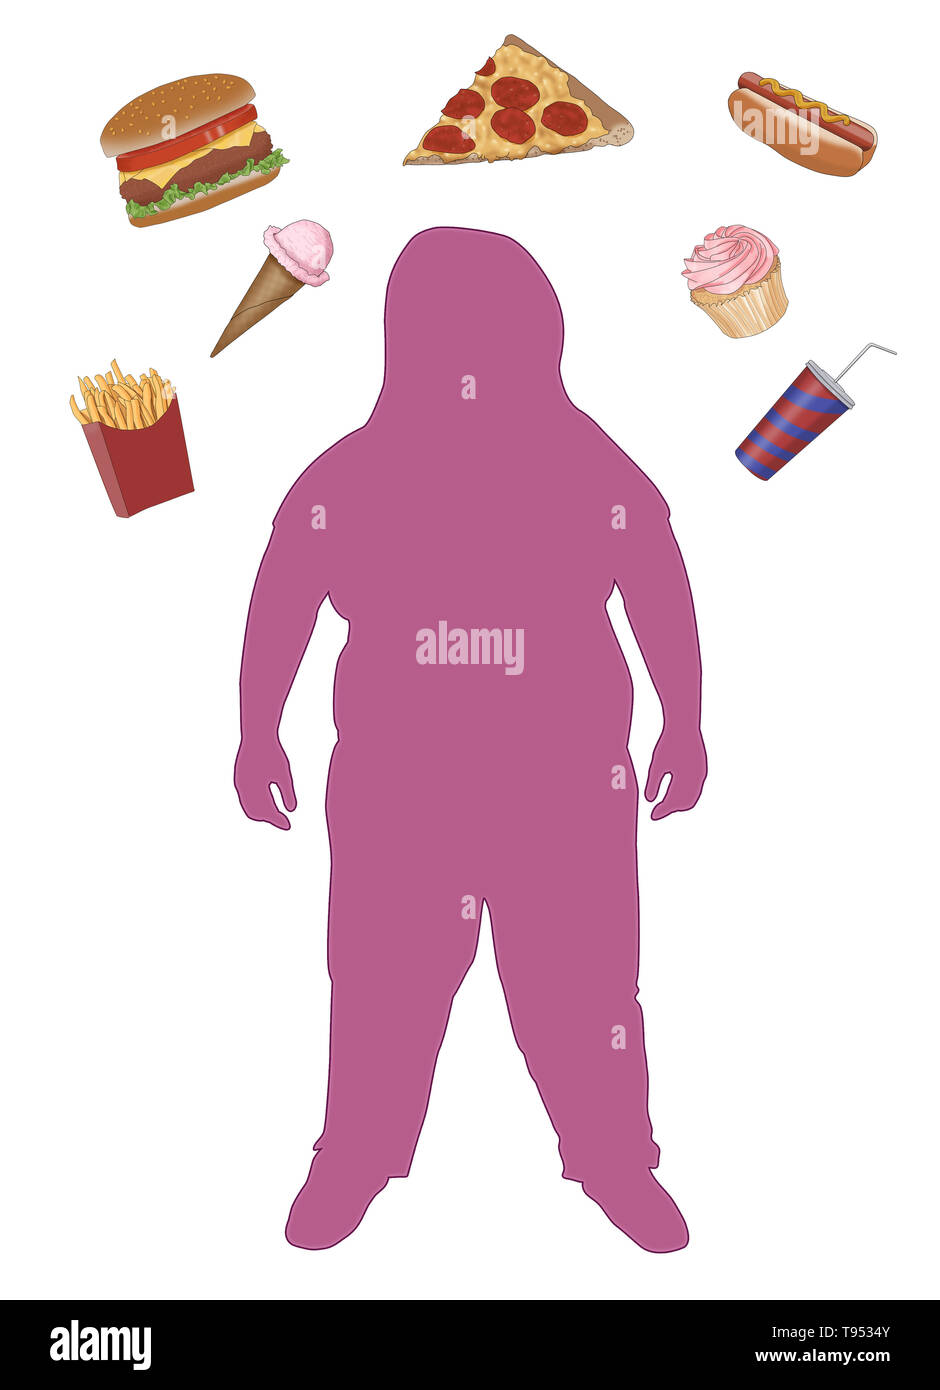 An illustration of an obese child surrounded by junk food. Stock Photo